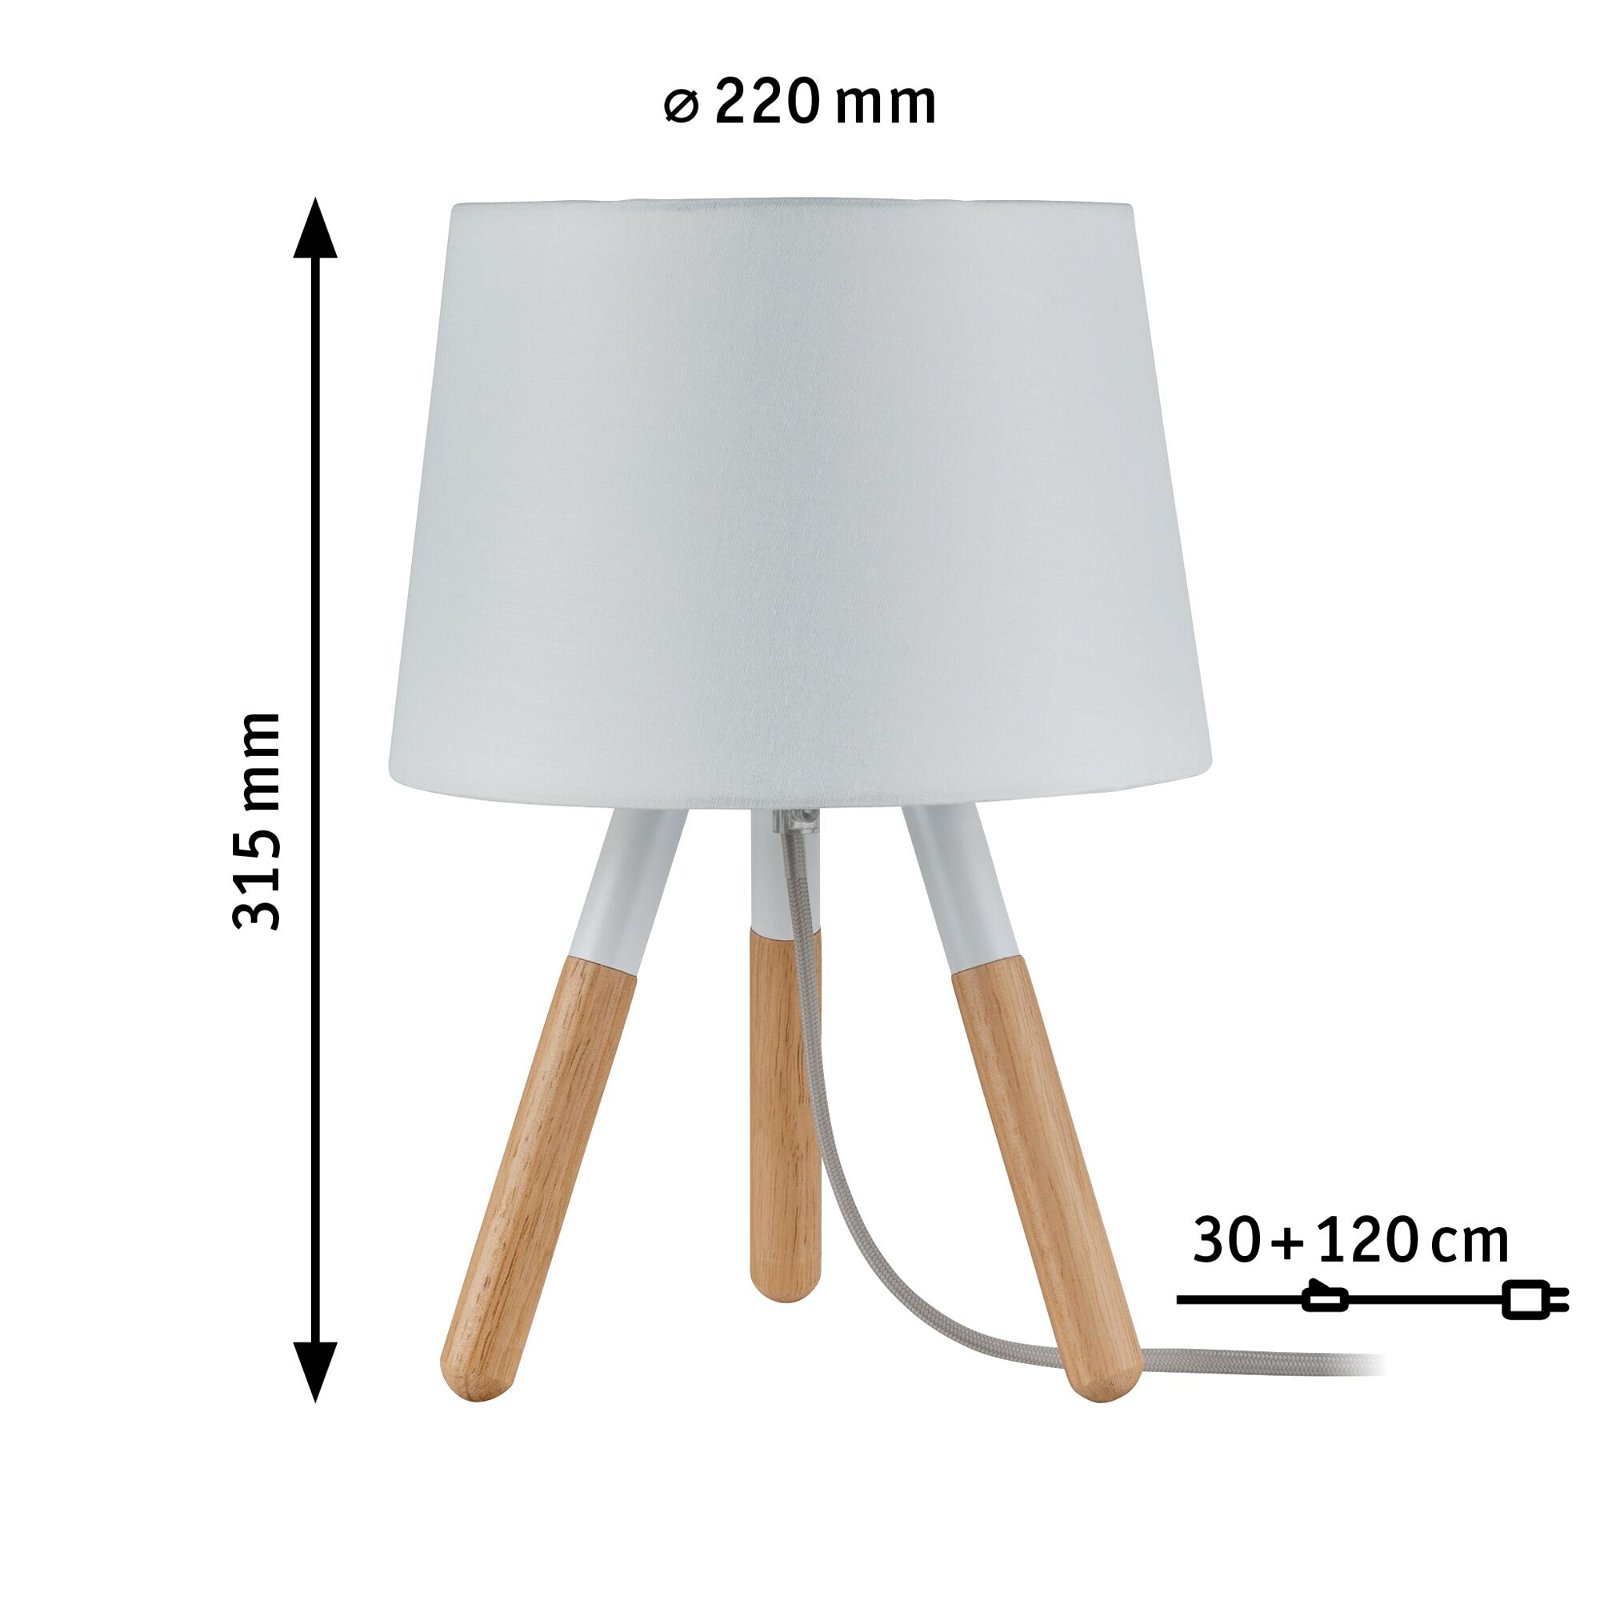 Neordic LED-tafellamp Berit E27 max. 20W Wit/Hout Textiel/Hout/Metaal